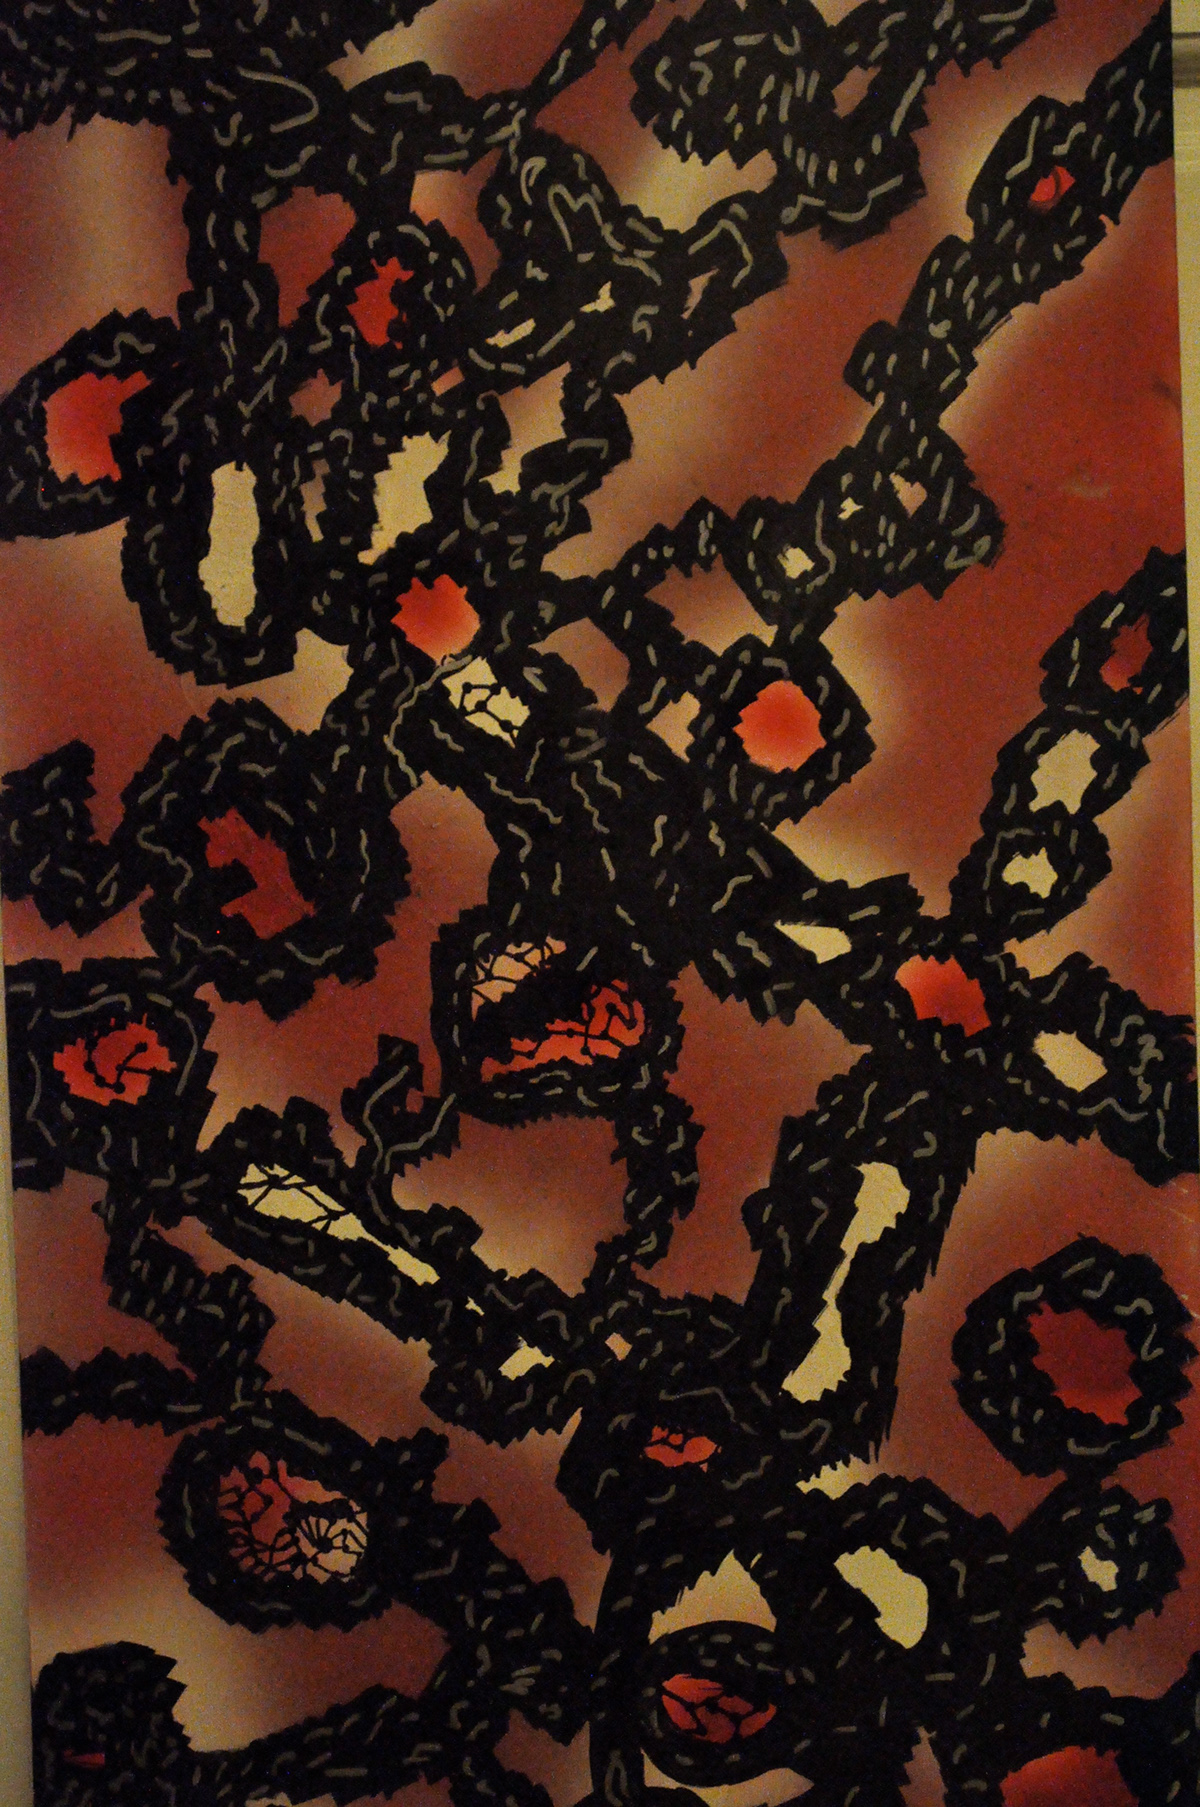 celll Red Blood Cells White Blood Cells spray paint